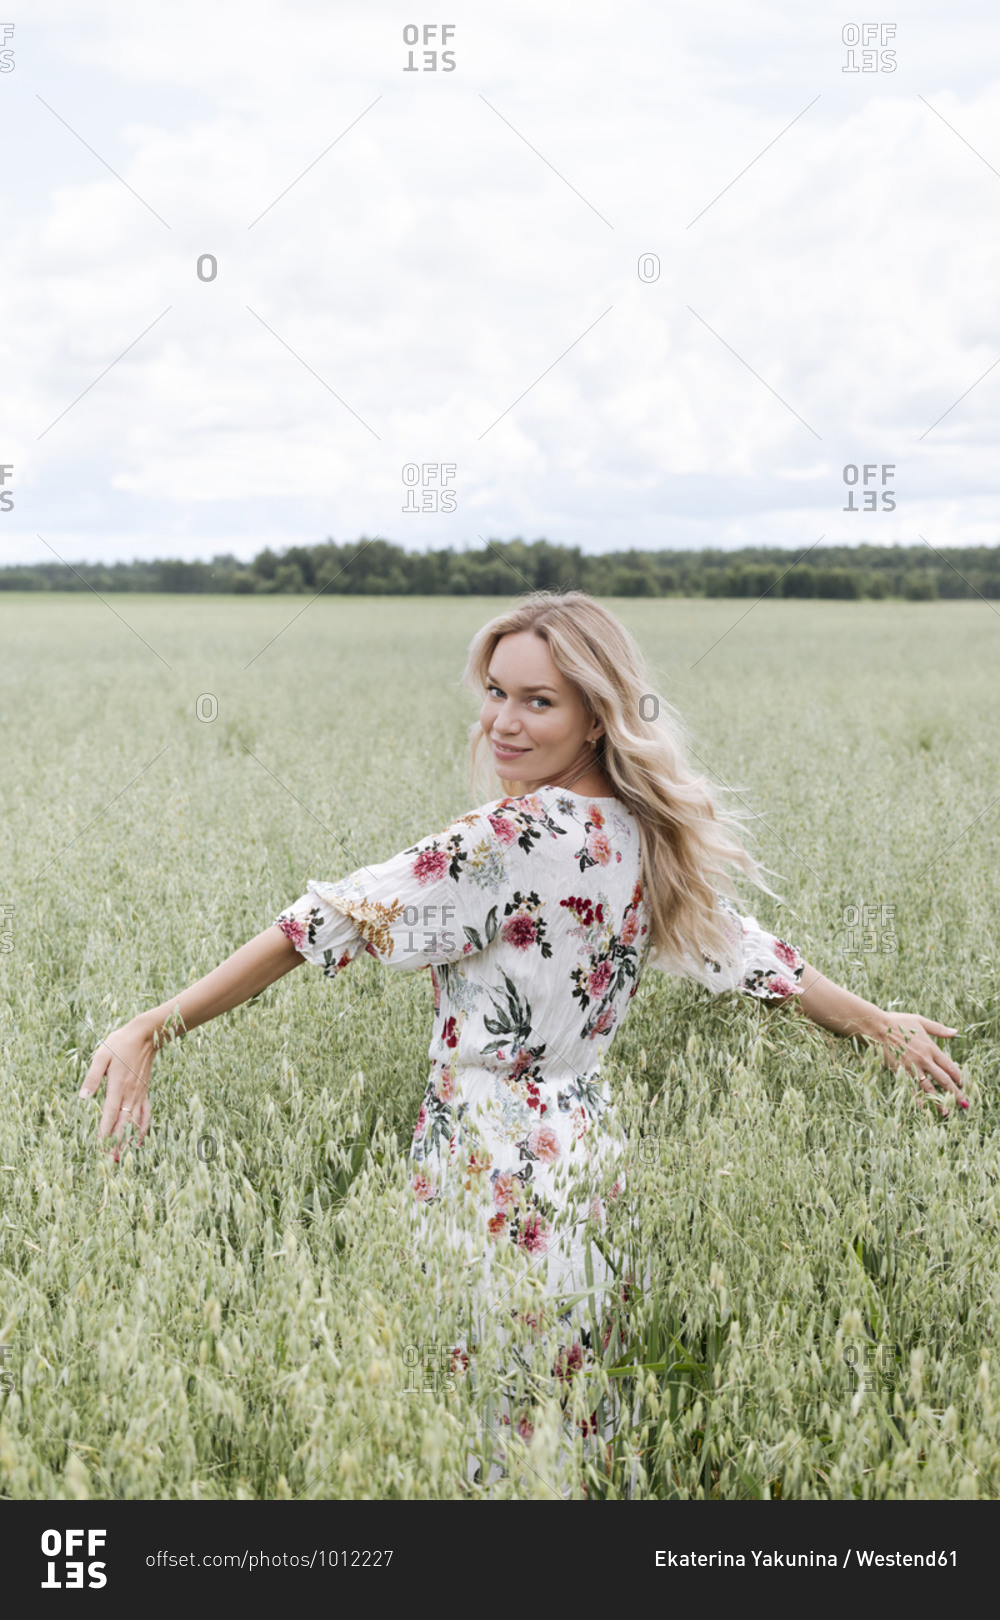 Beautiful woman with blond hair standing amidst oats field against cloudy sky